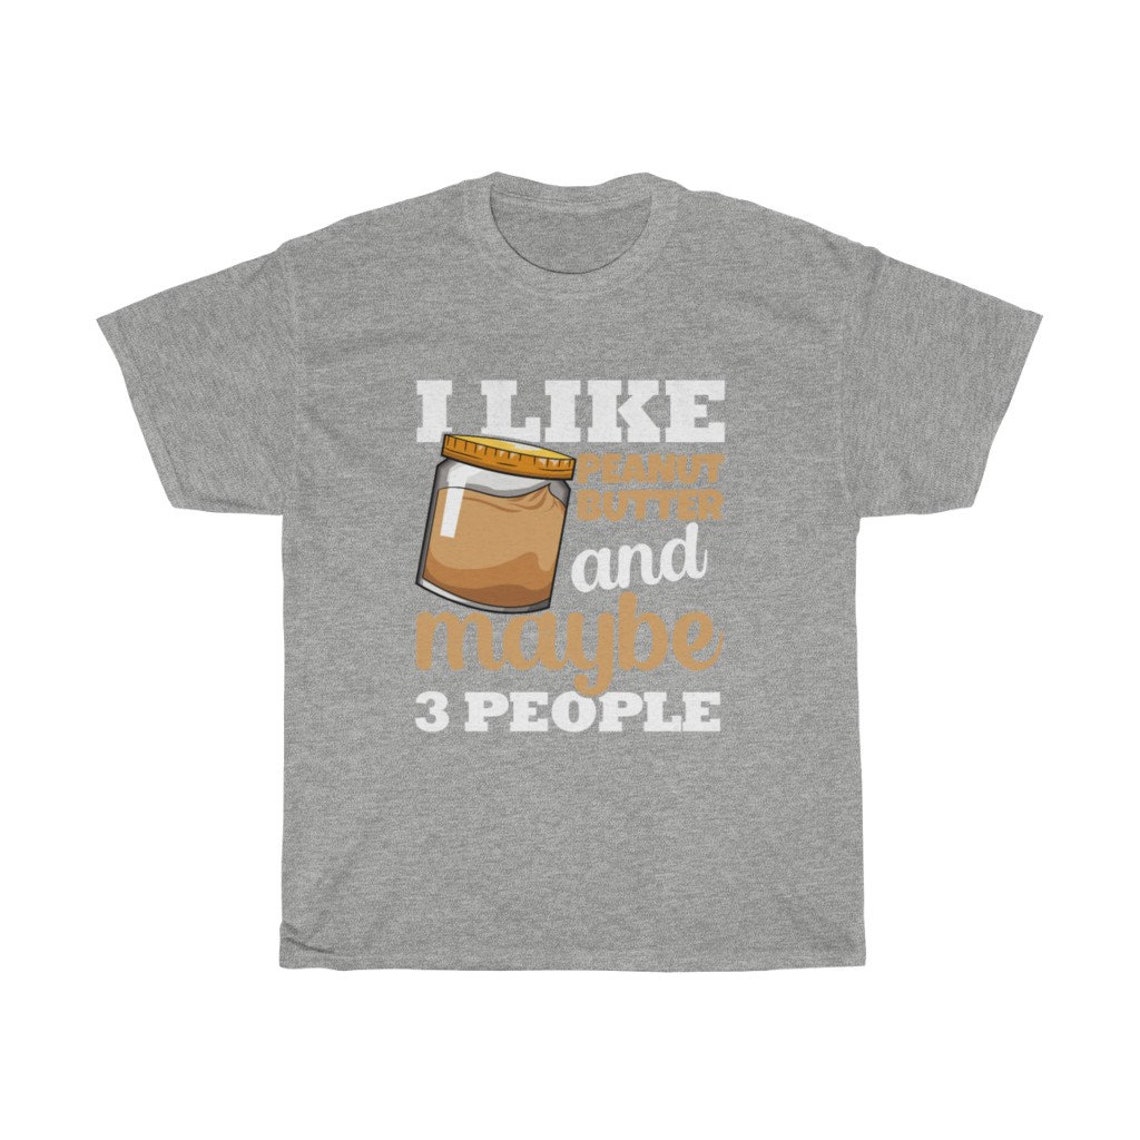 I Like Peanut Butter And Maybe 3 People Funny T-Shirt | Etsy